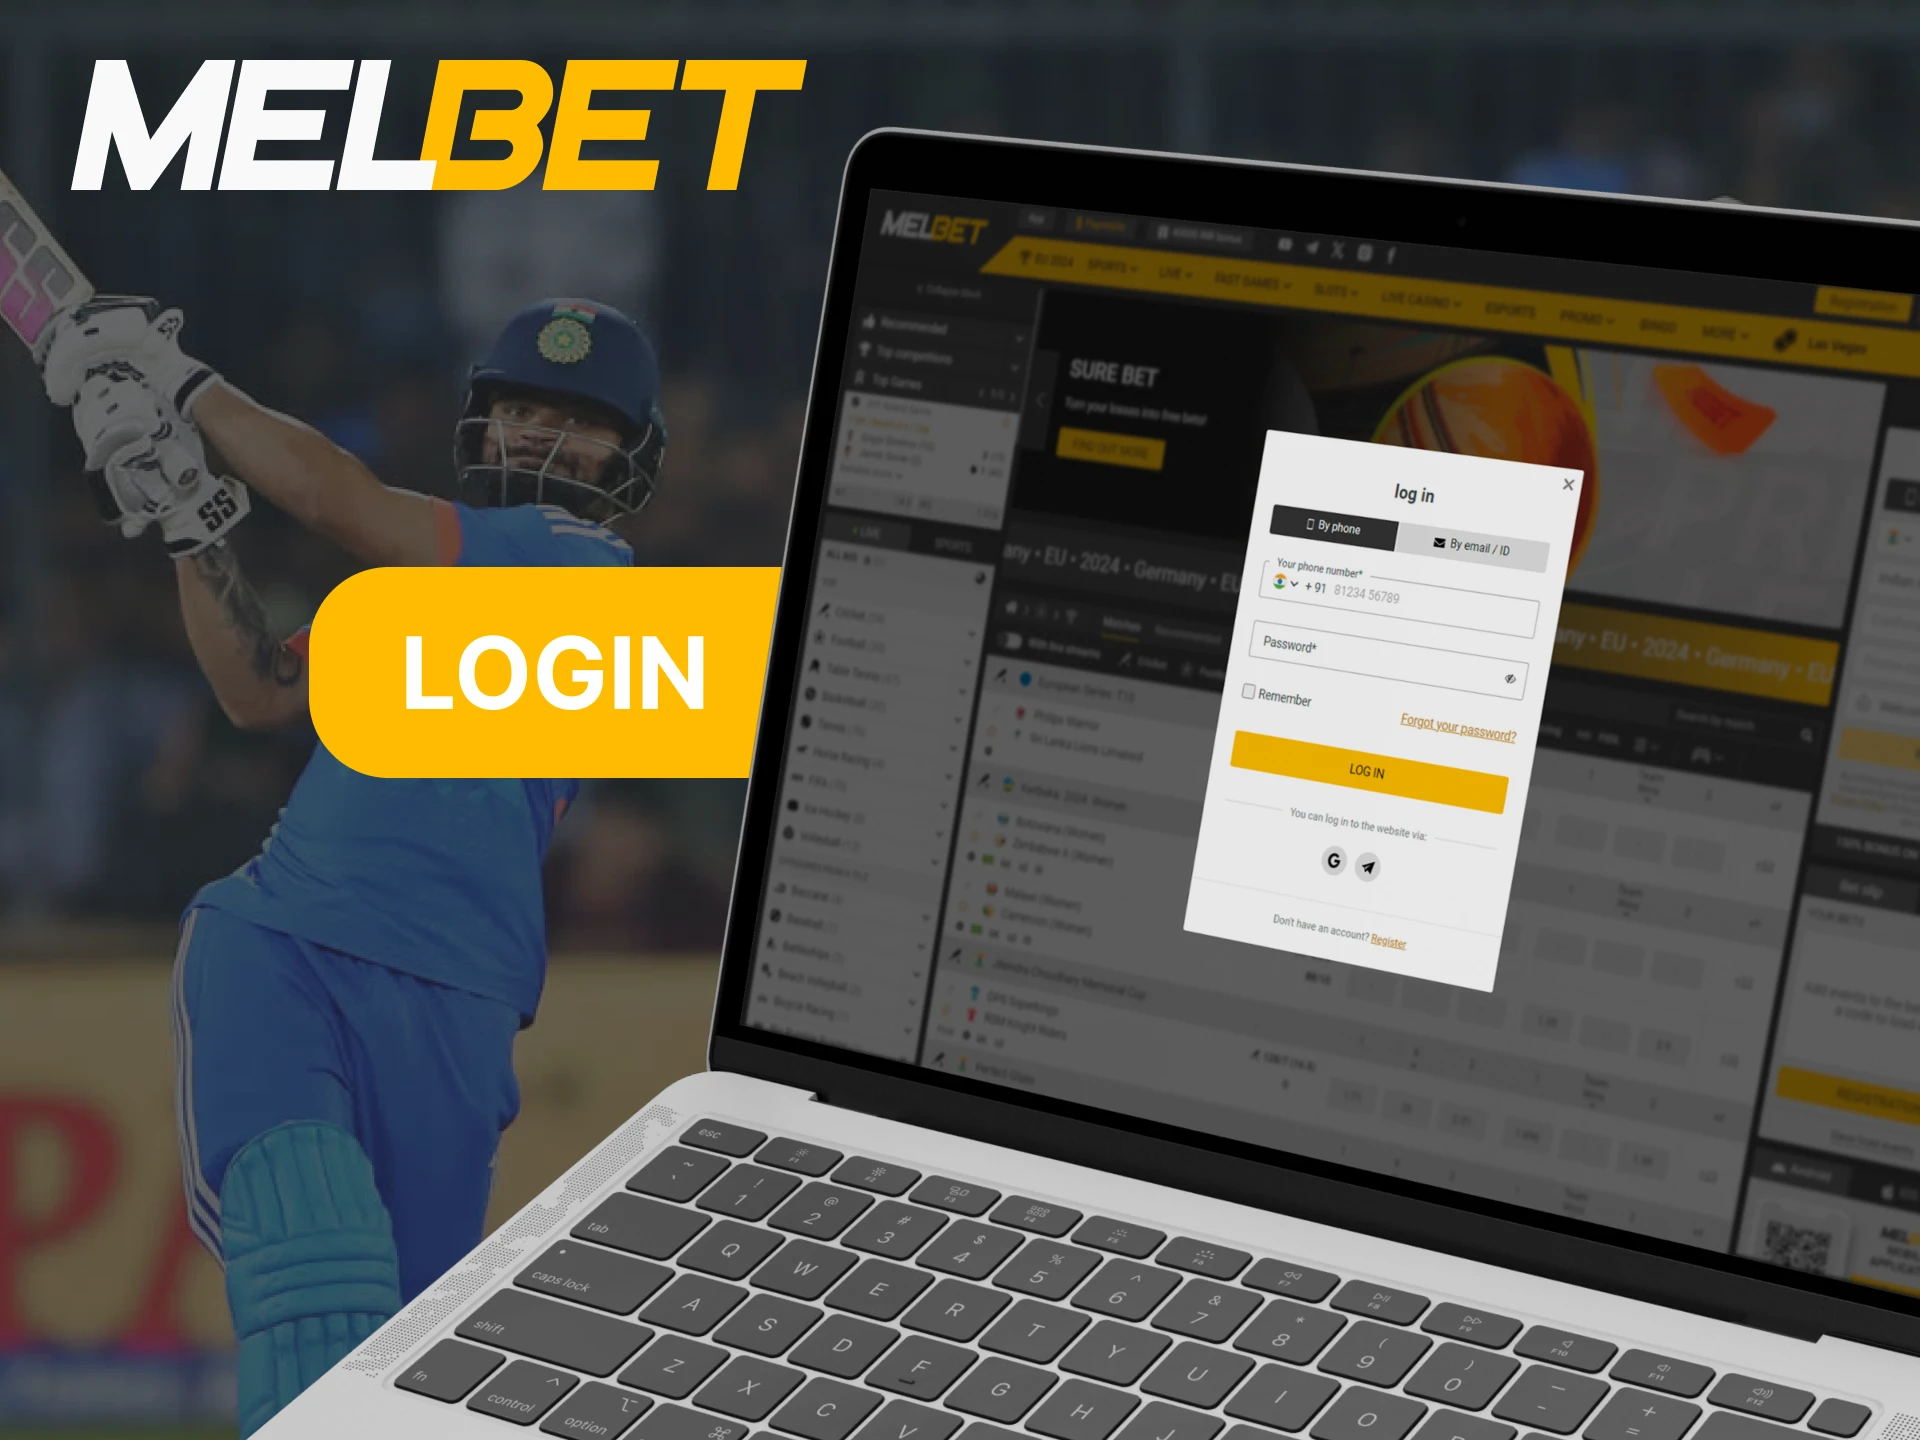 If you have a Melbet account, simply log in and start betting.